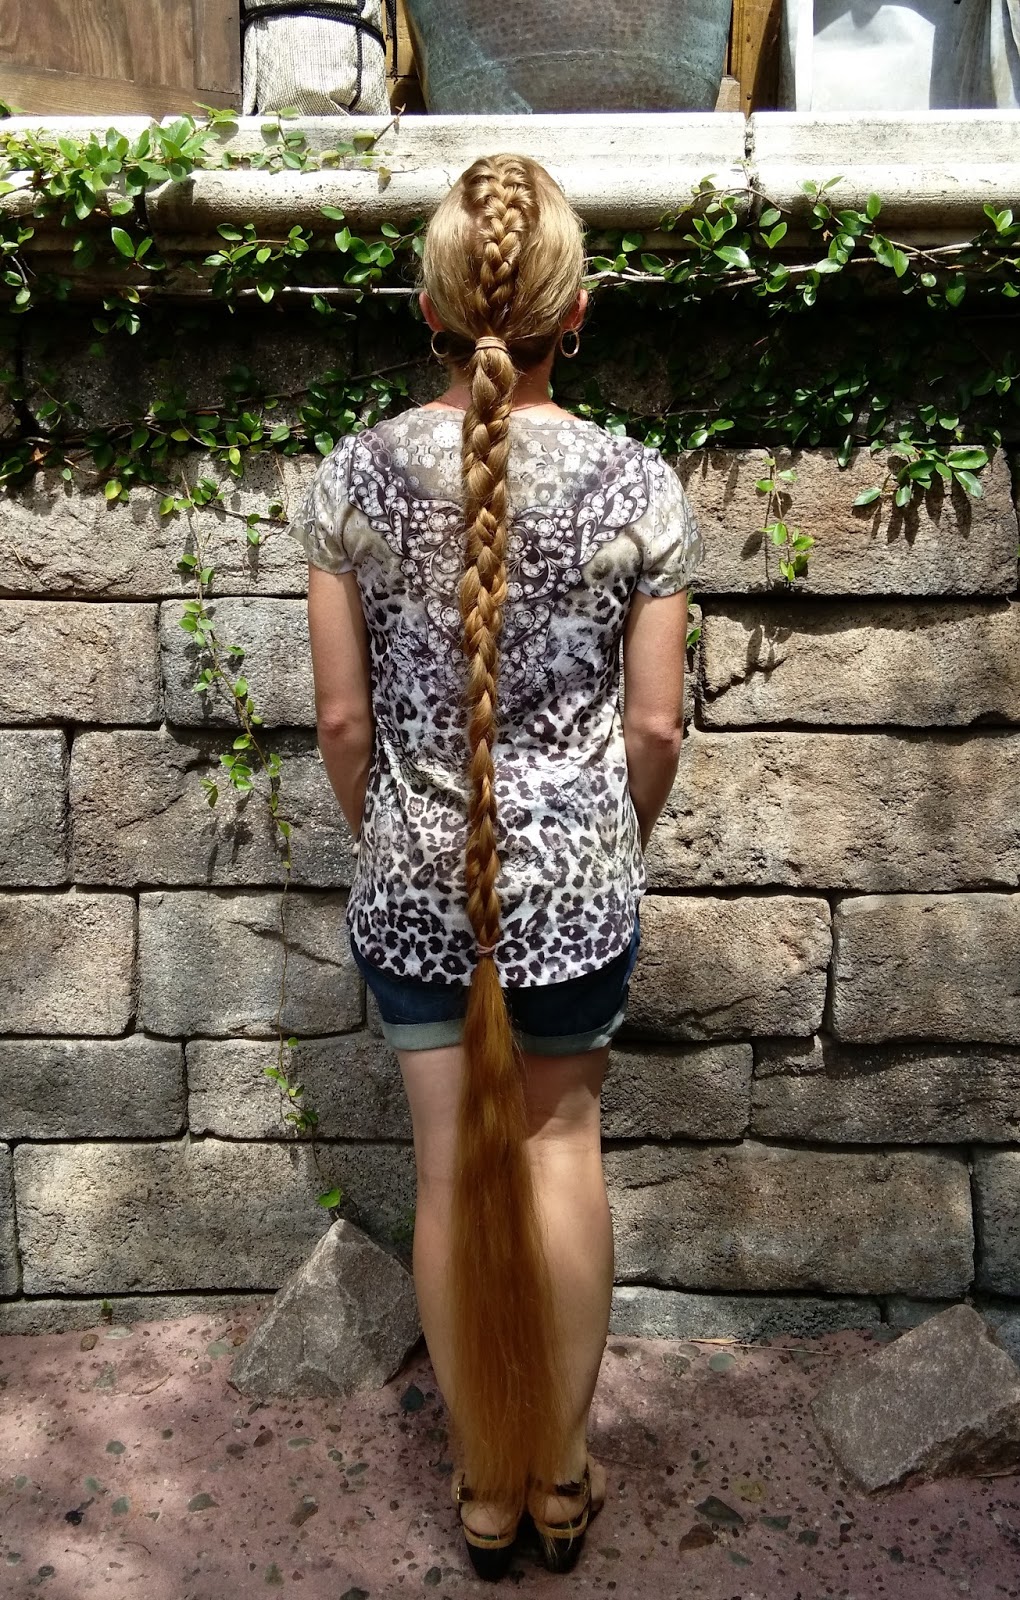 Ankle-Length Braided Ponytail.